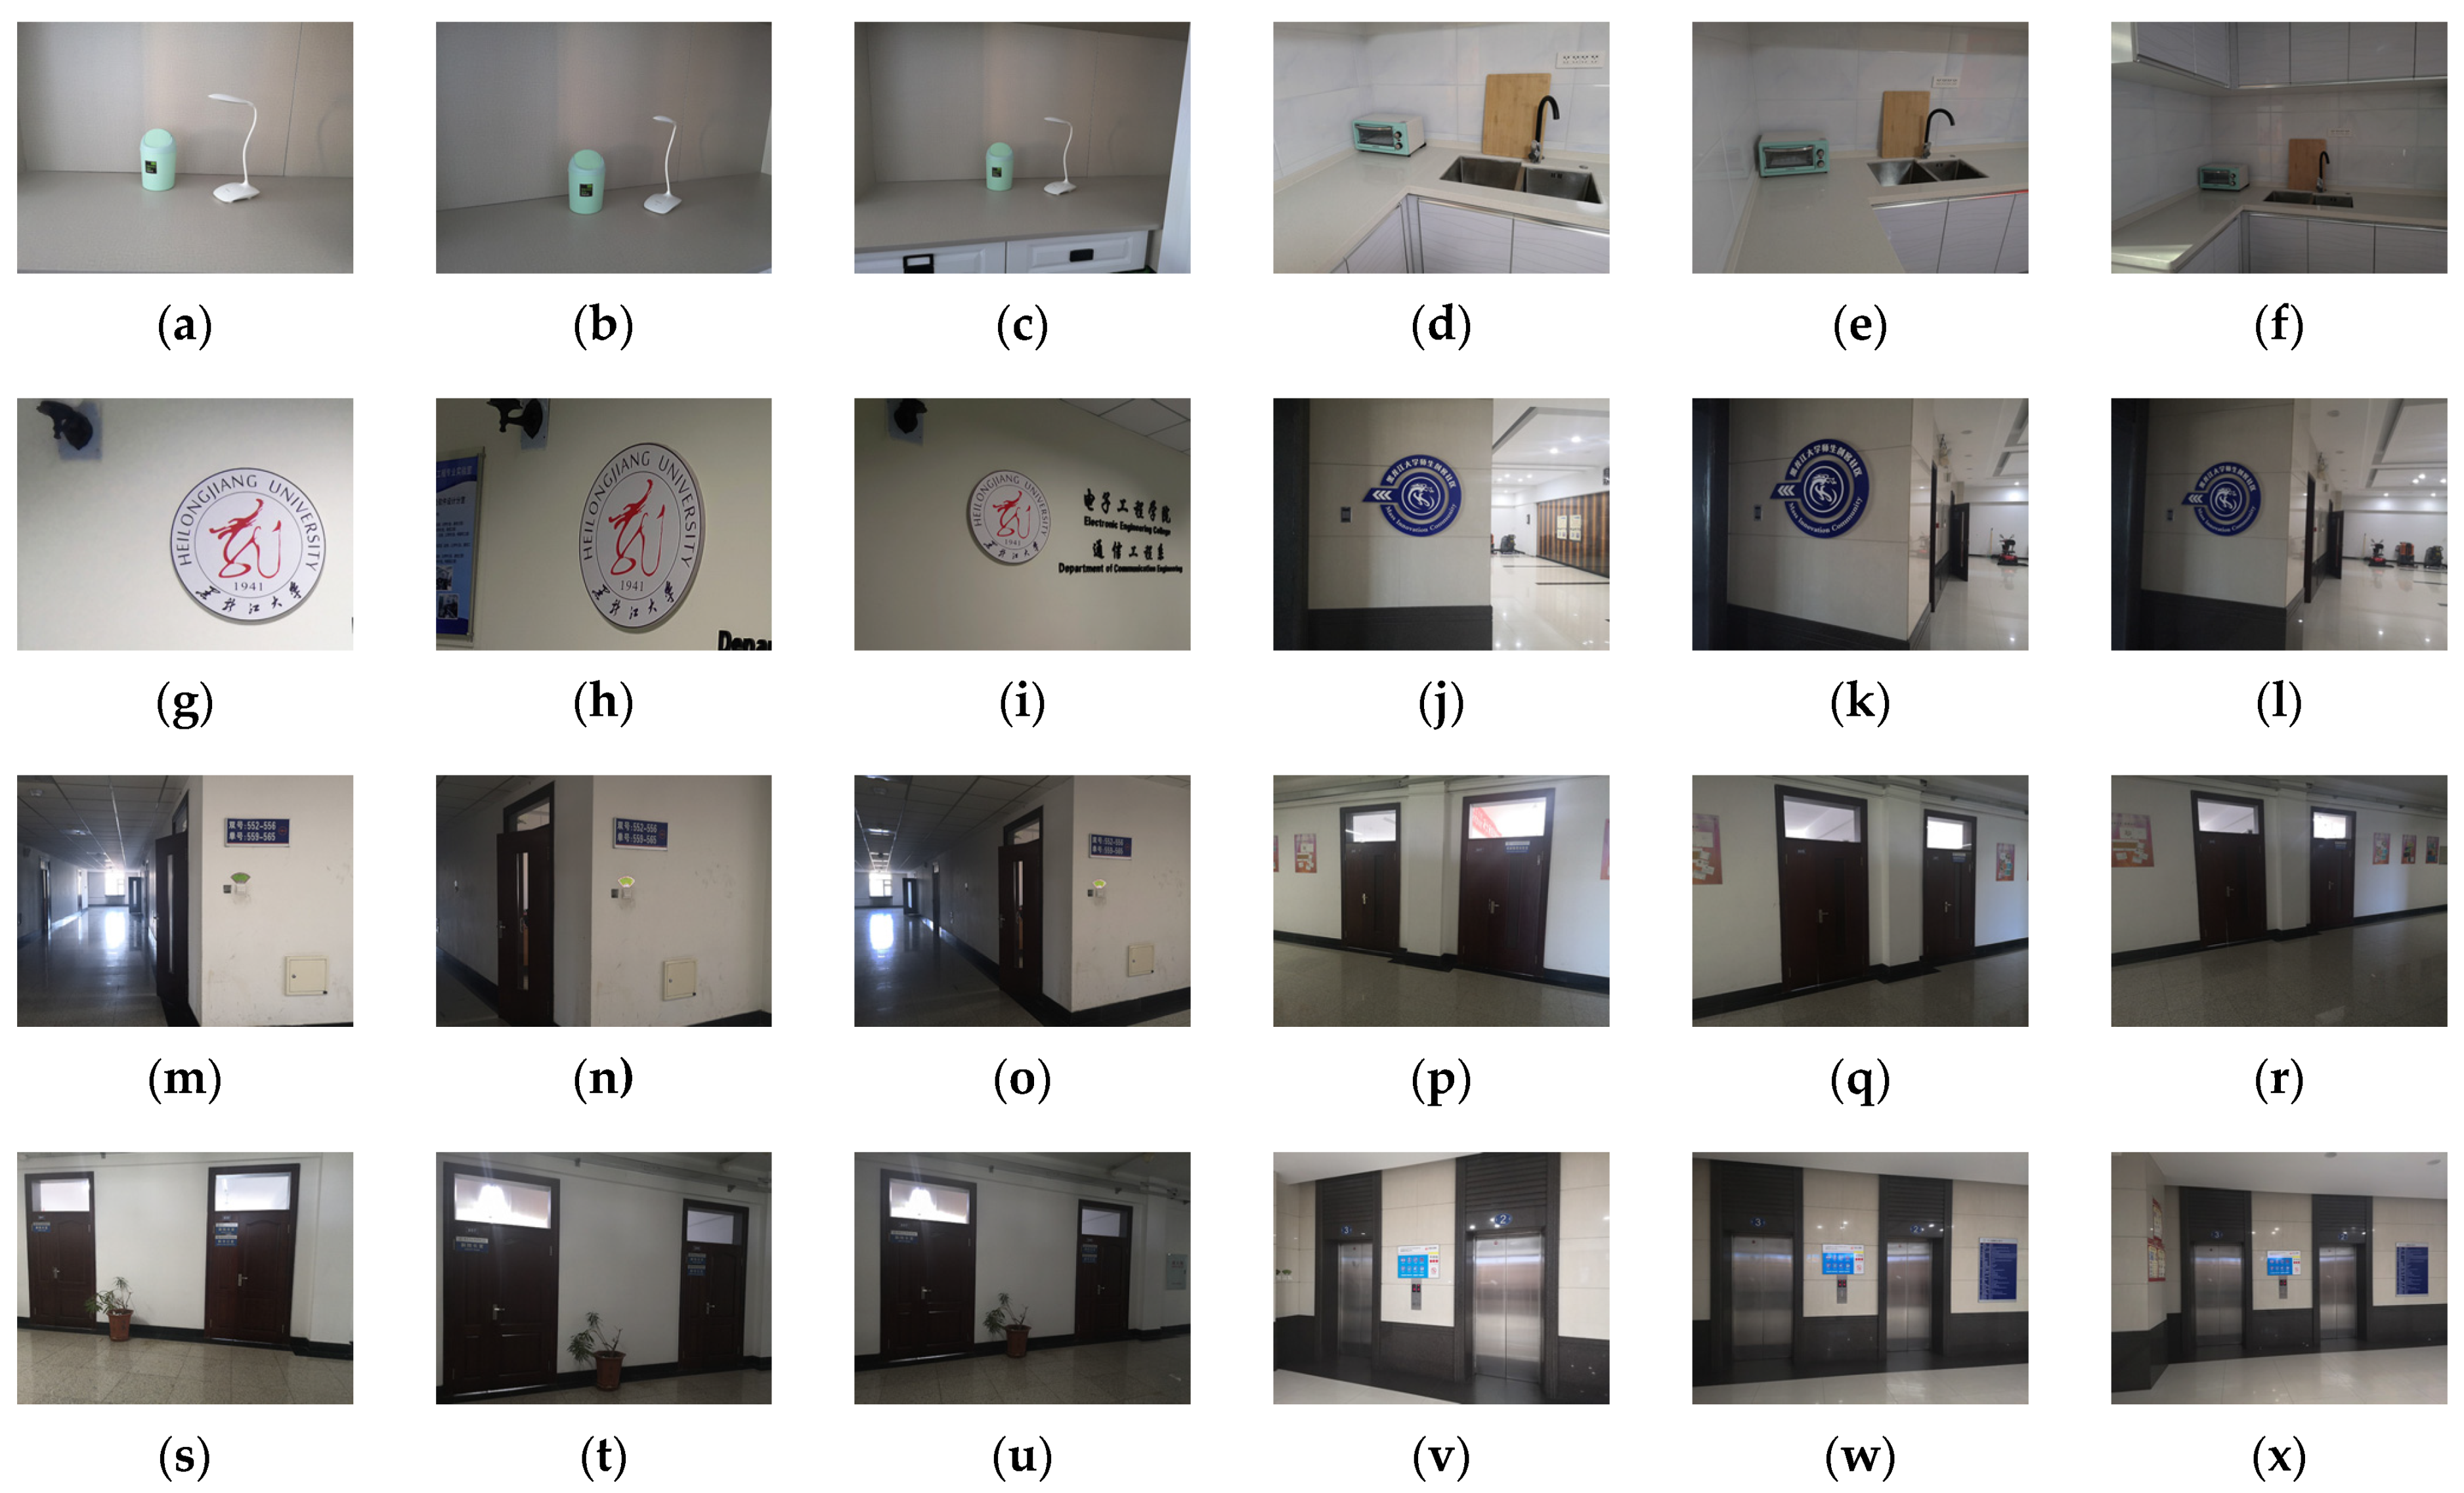 Ijgi Free Full Text Research On Feature Extraction Method Of Indoor Visual Positioning Image Based On Area Division Of Foreground And Background Html